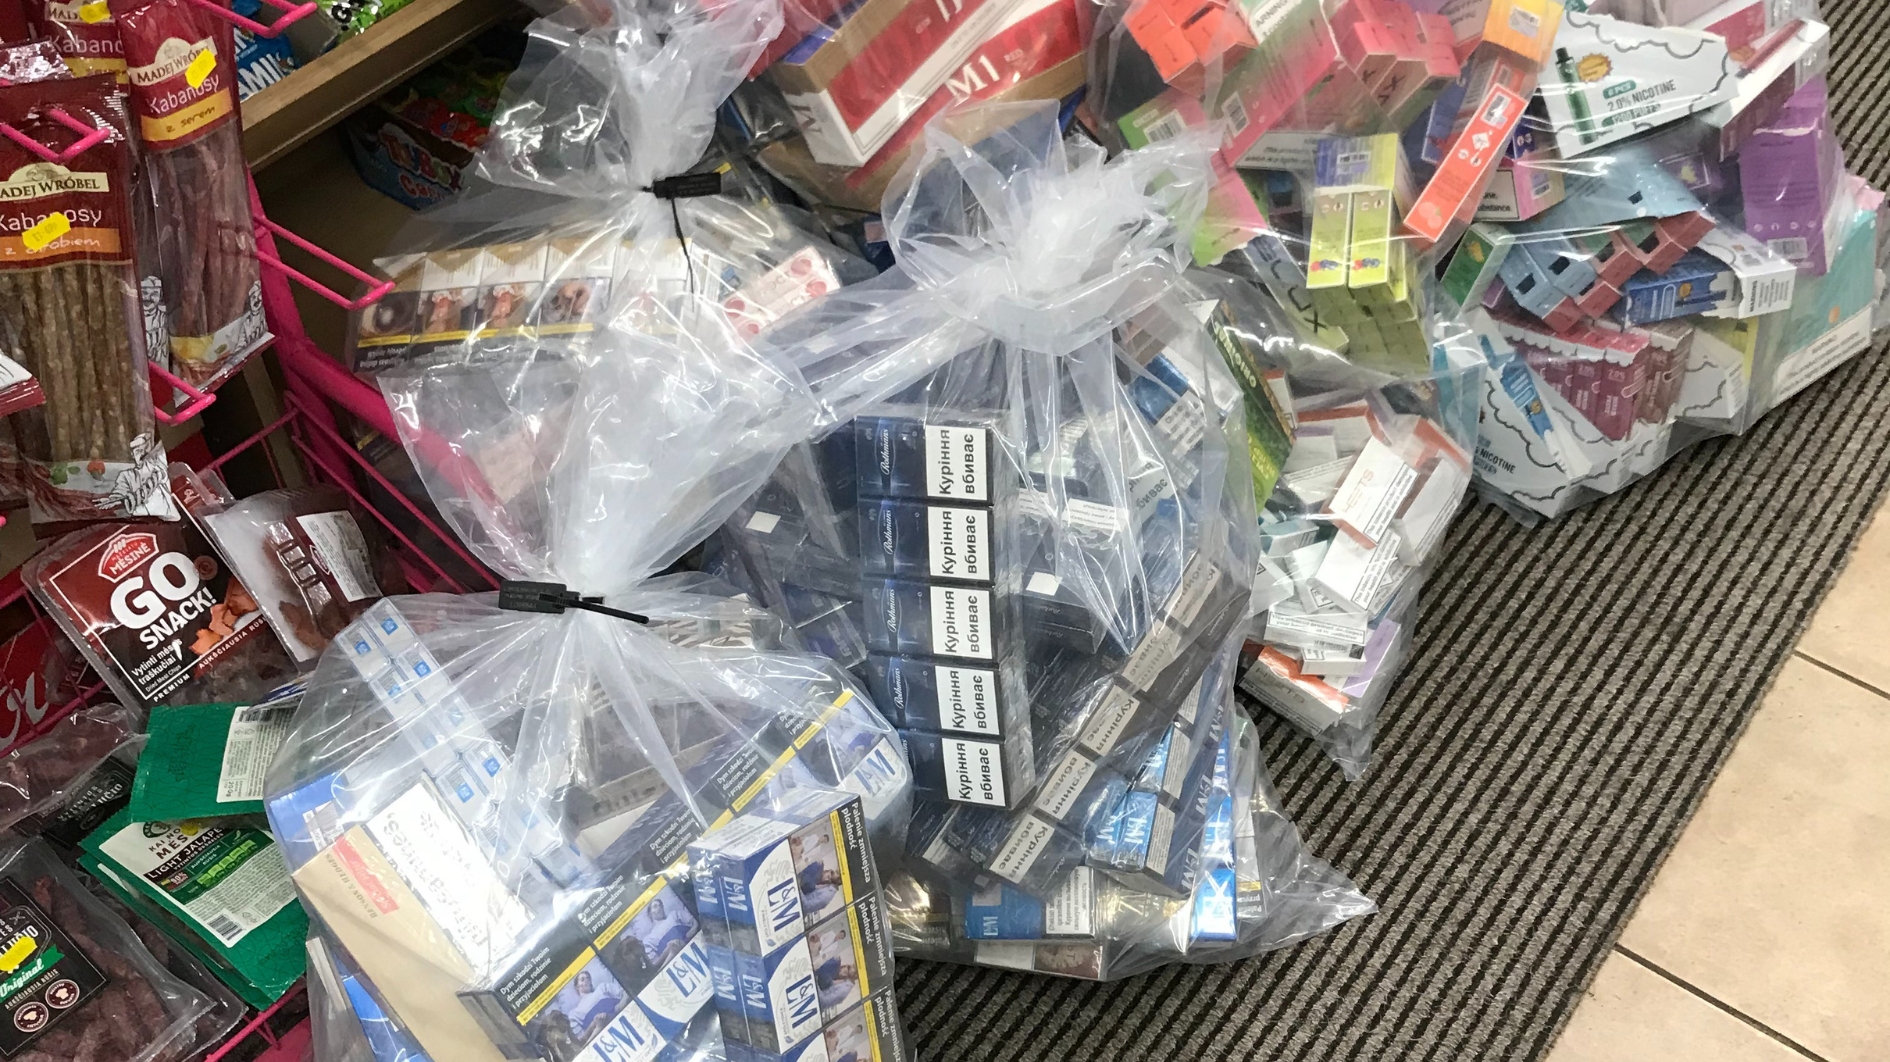 Bags of illegal cigarettes and vapes piled on a floor in a shop